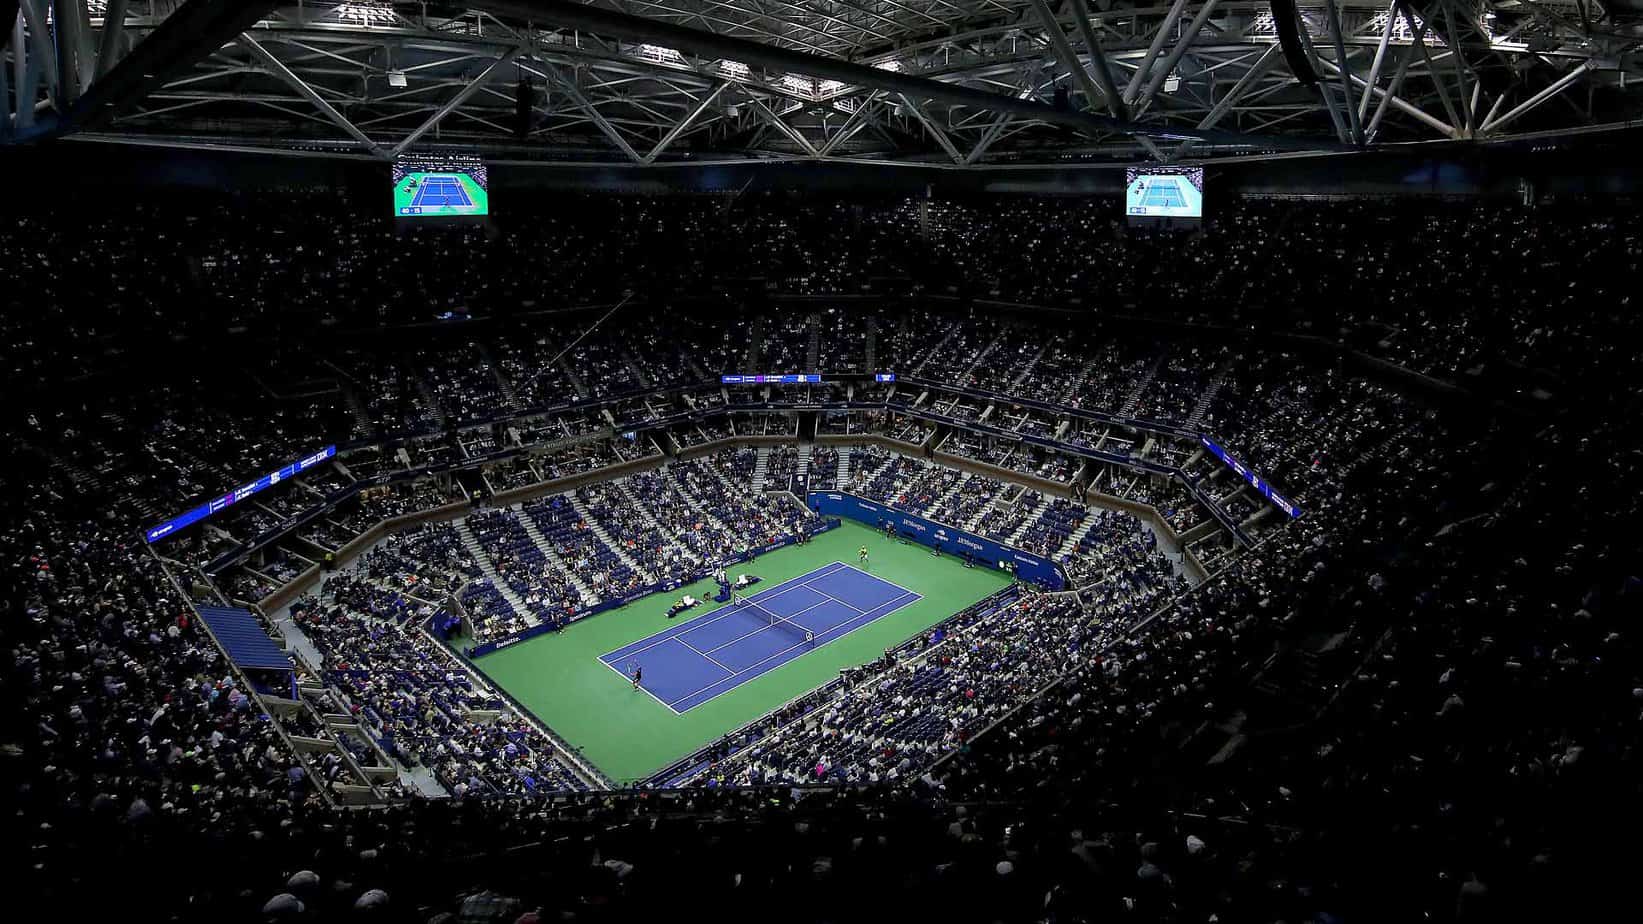 US Open 2022 – Event Overview and Preview